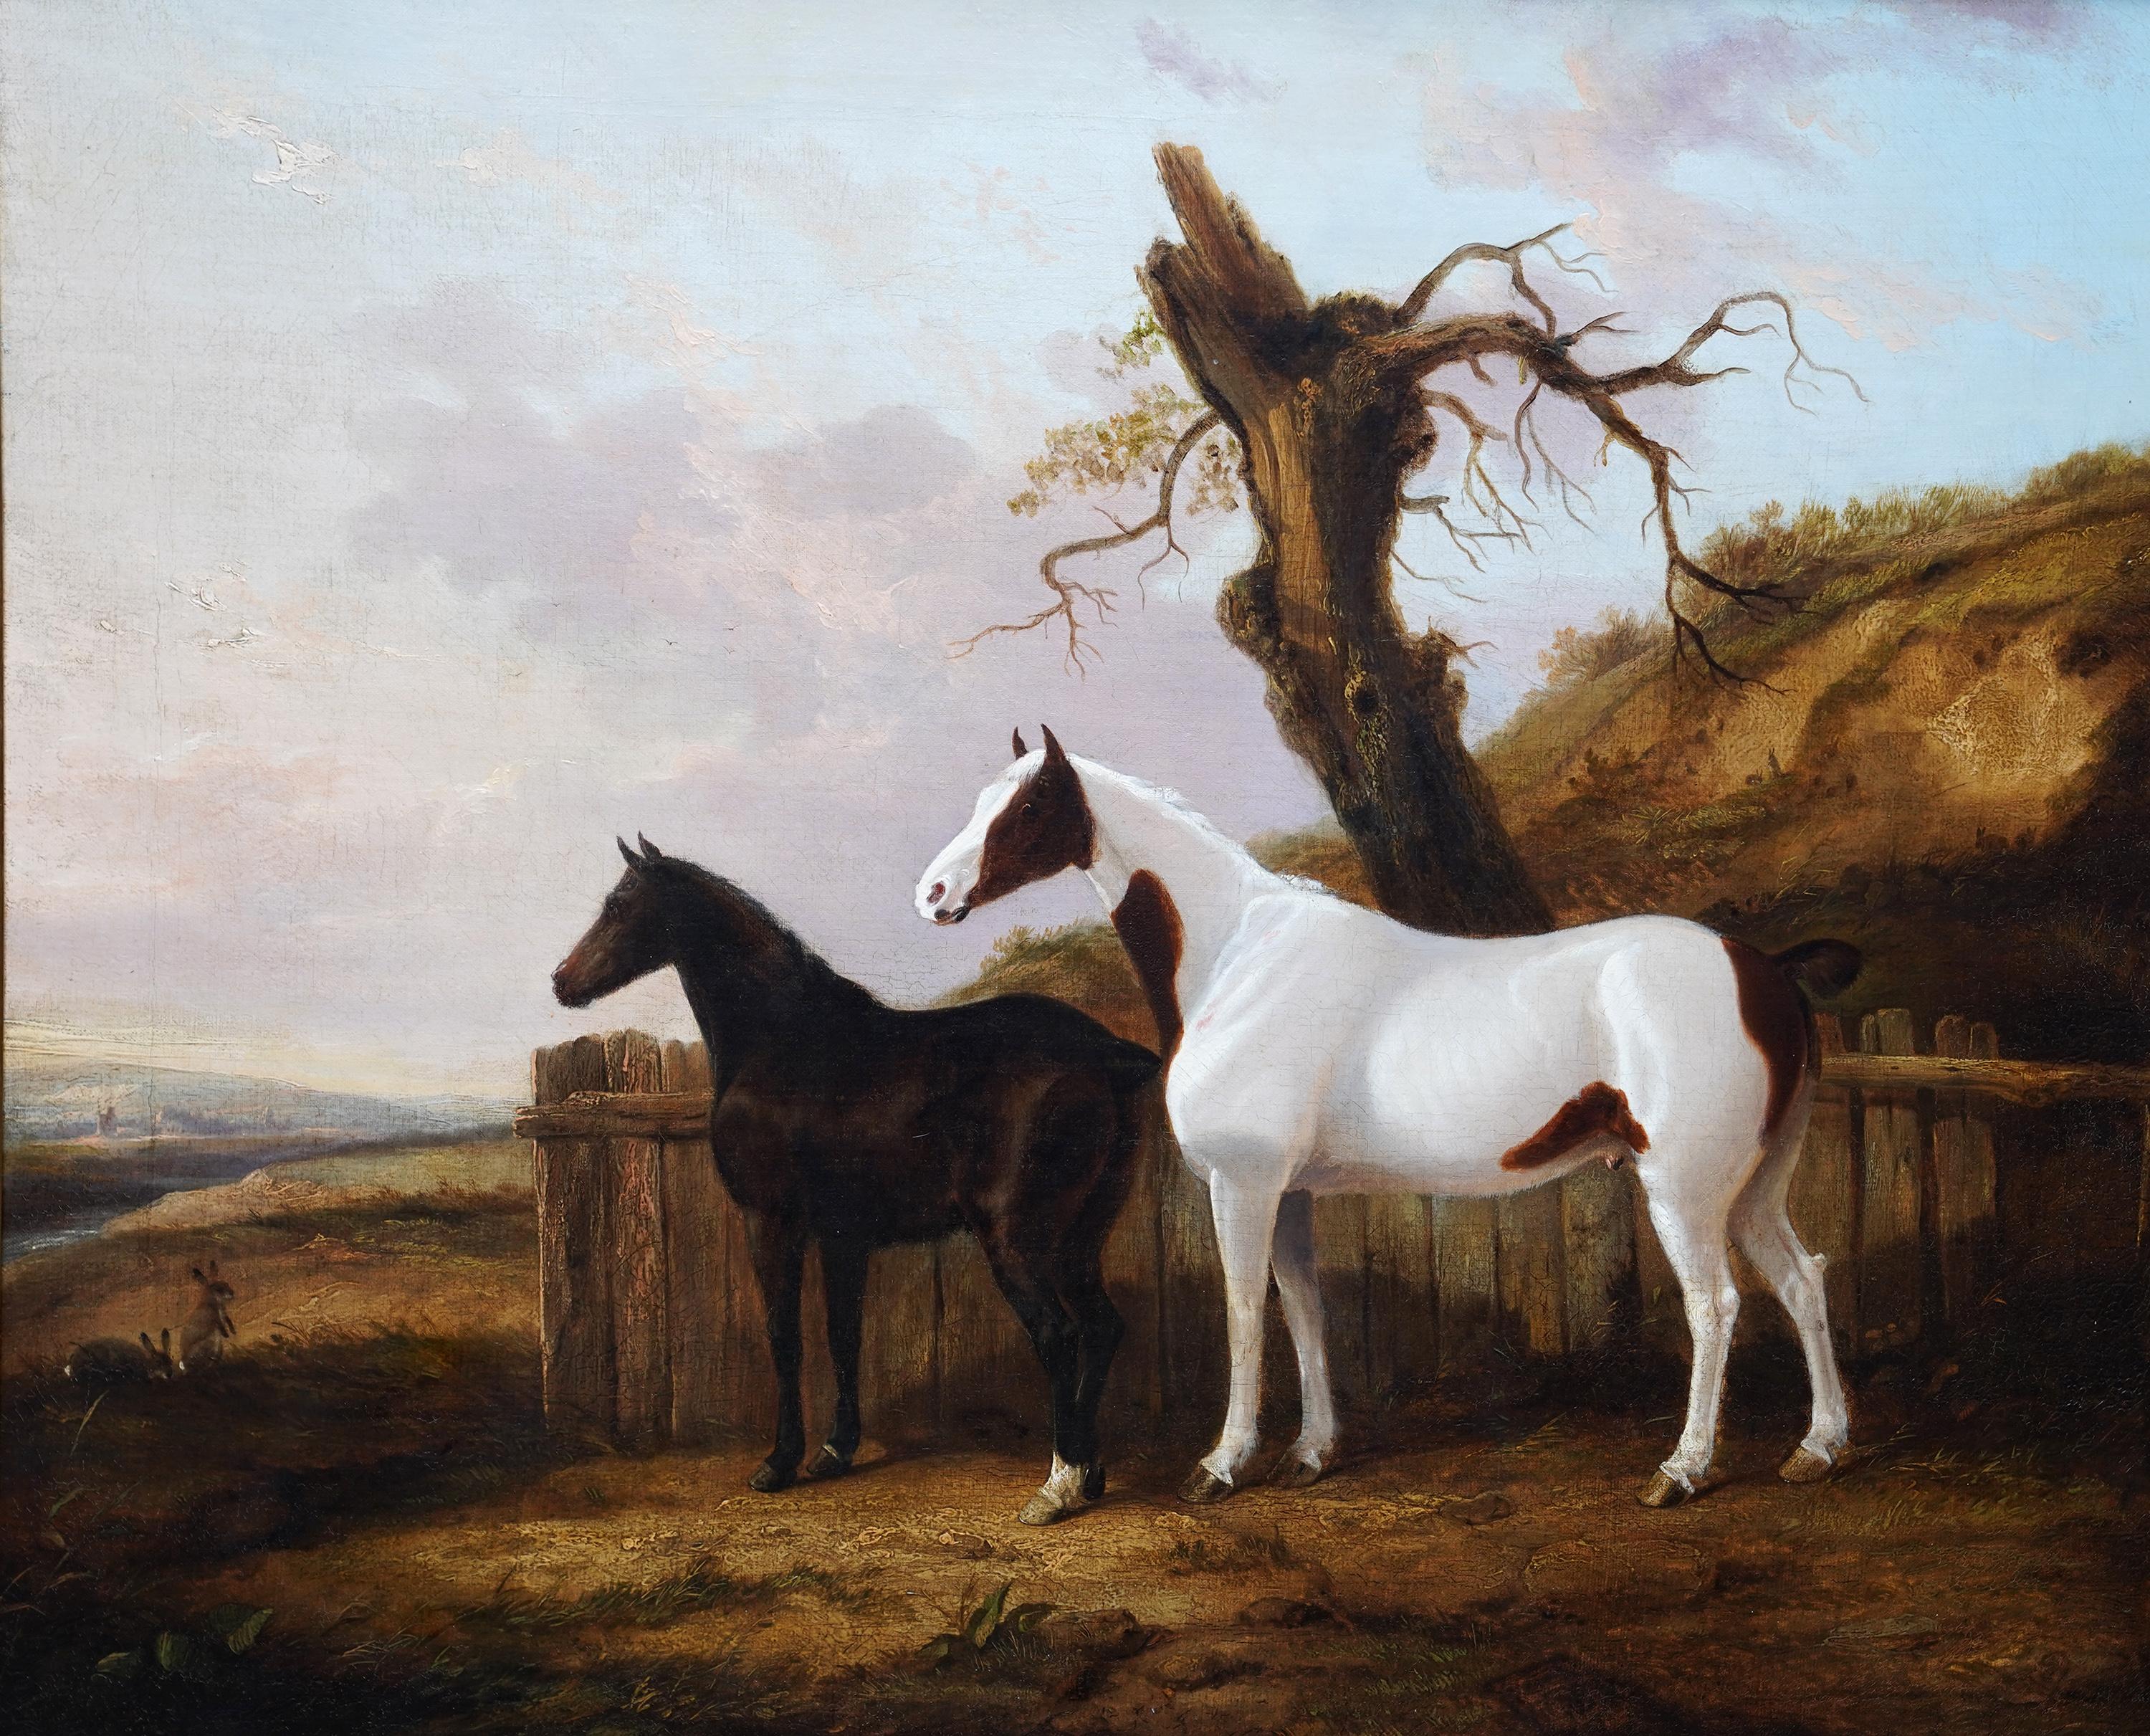 Portrait of Two Horses in a Landscape - British 19thC equine art oil painting For Sale 5